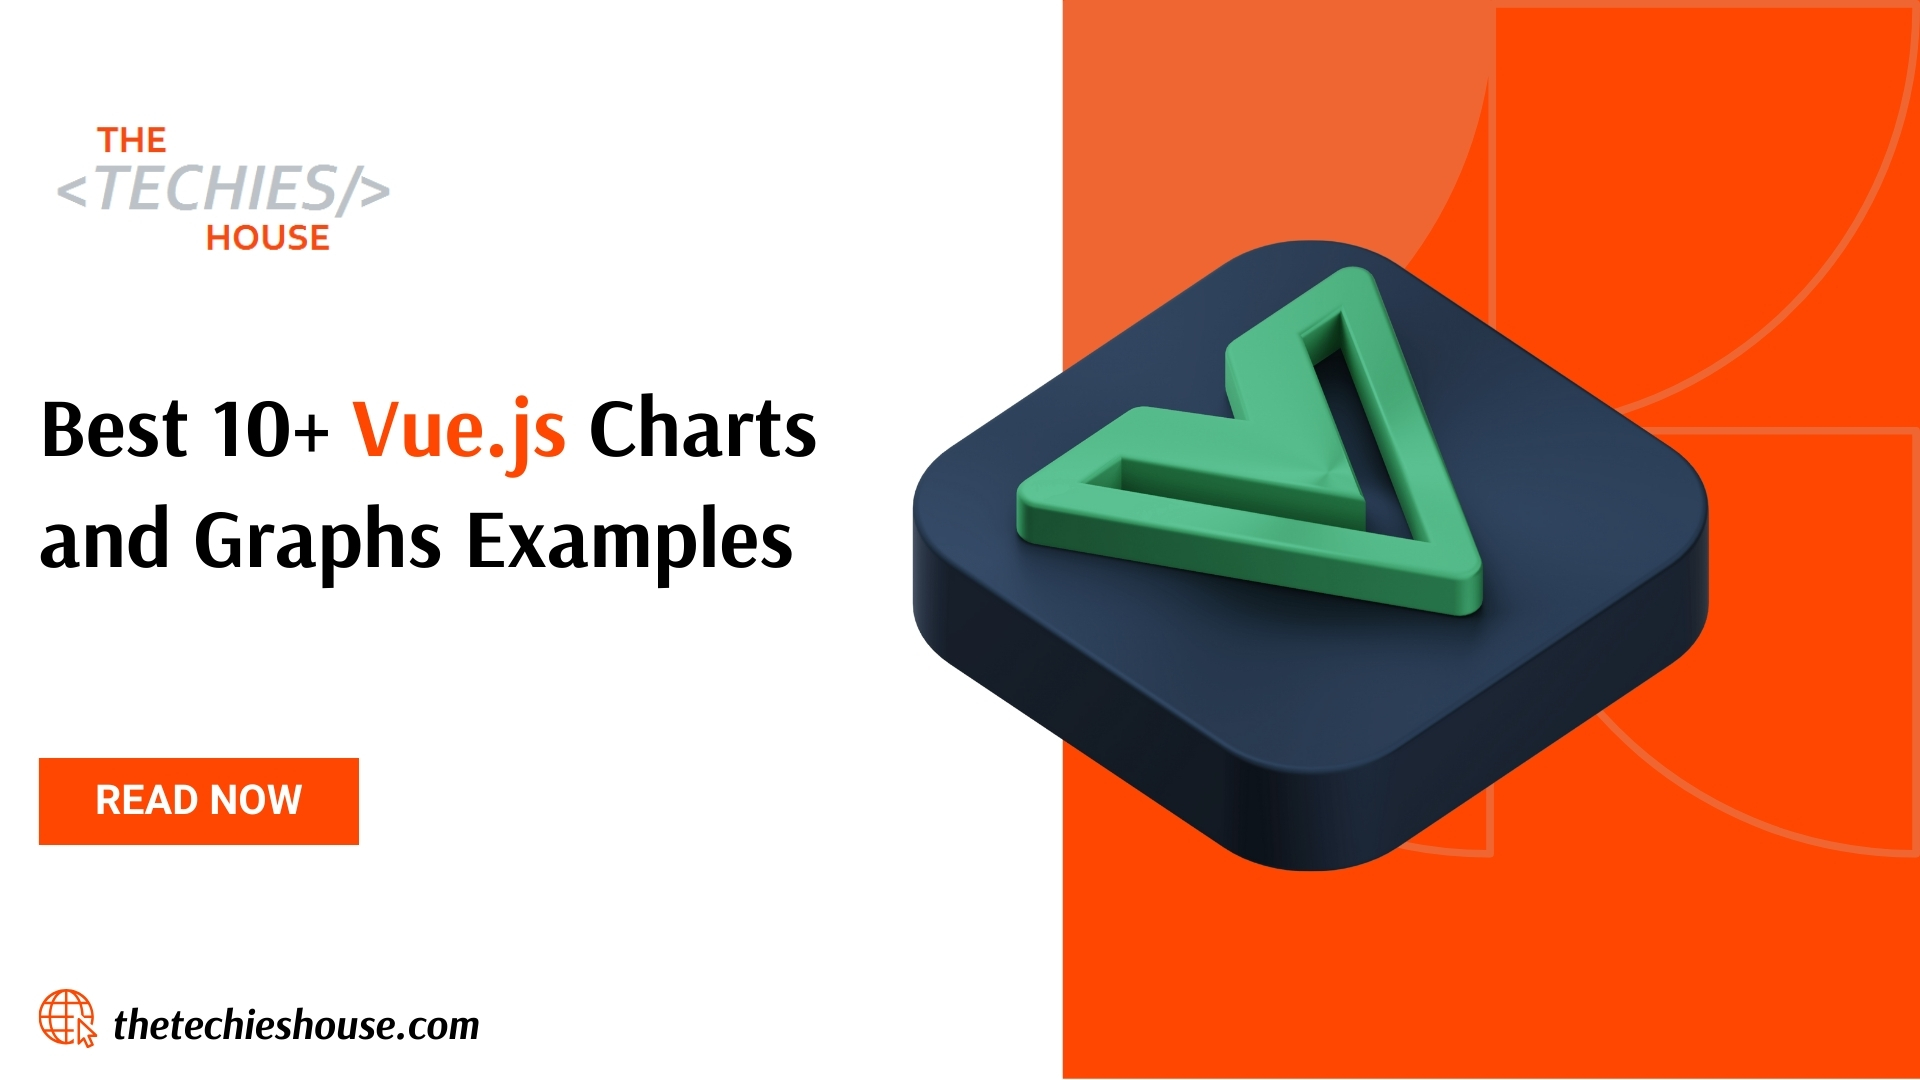 Best 10+ Vue.js Charts and Graphs Examples